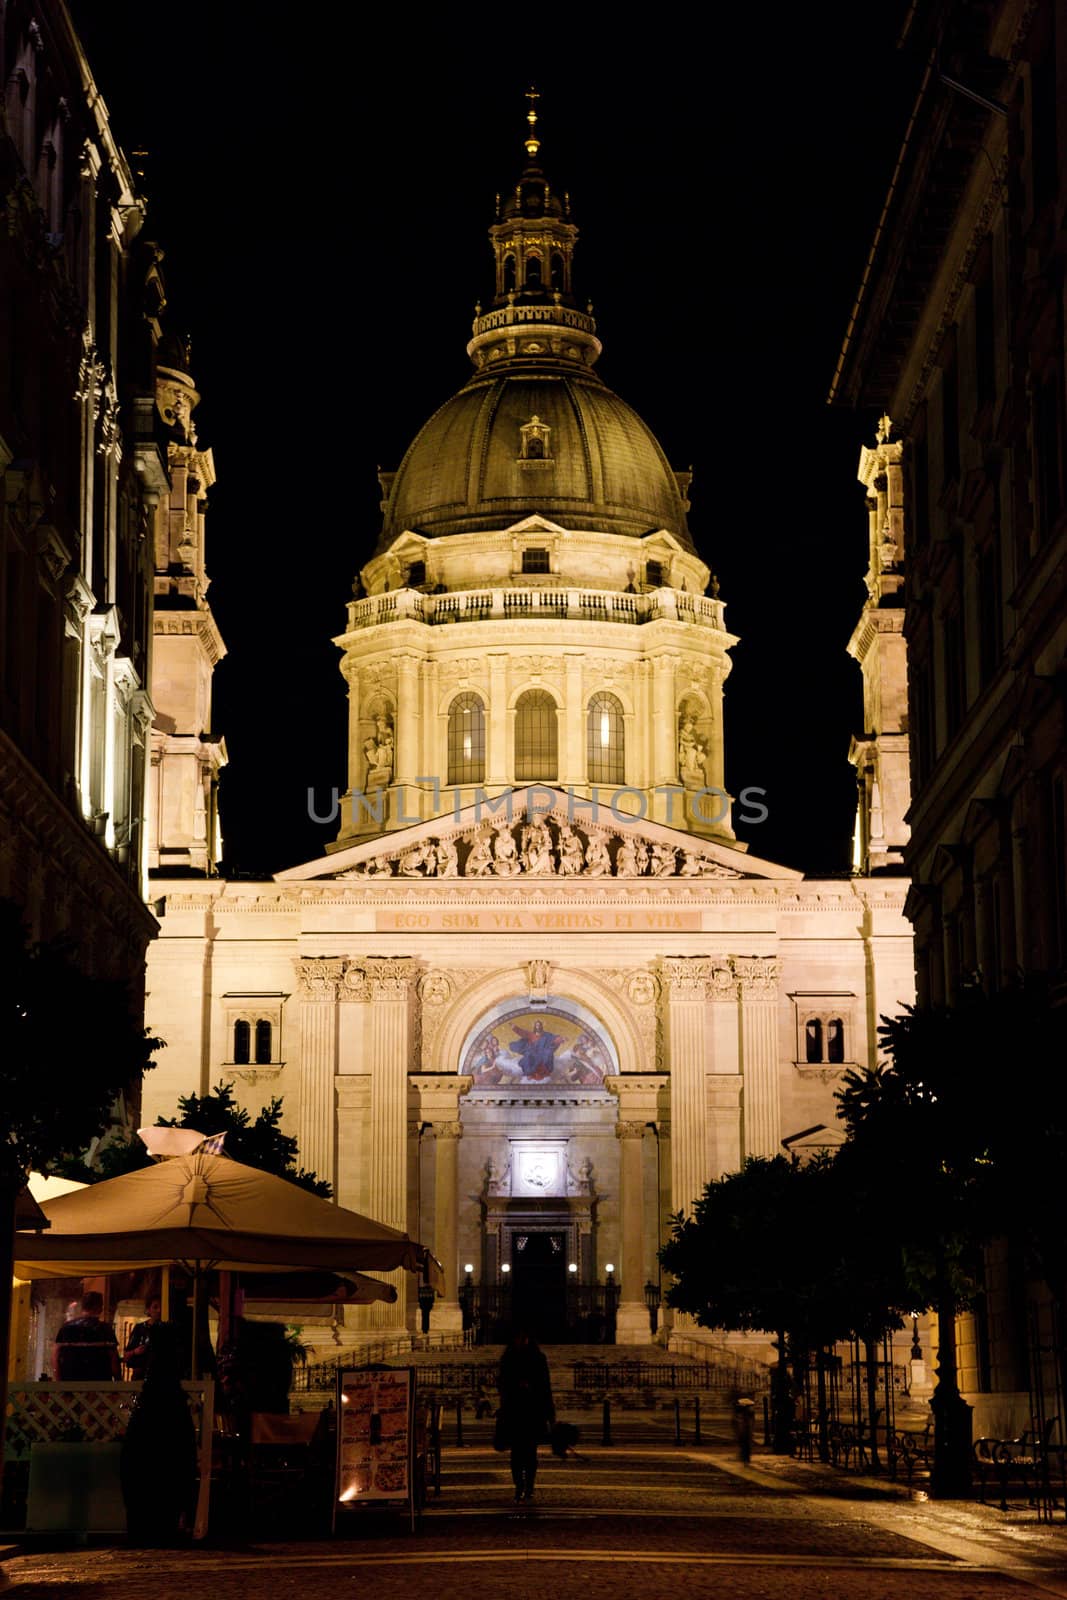 St. Stephen's Basilica at night in Budapest, Hungary